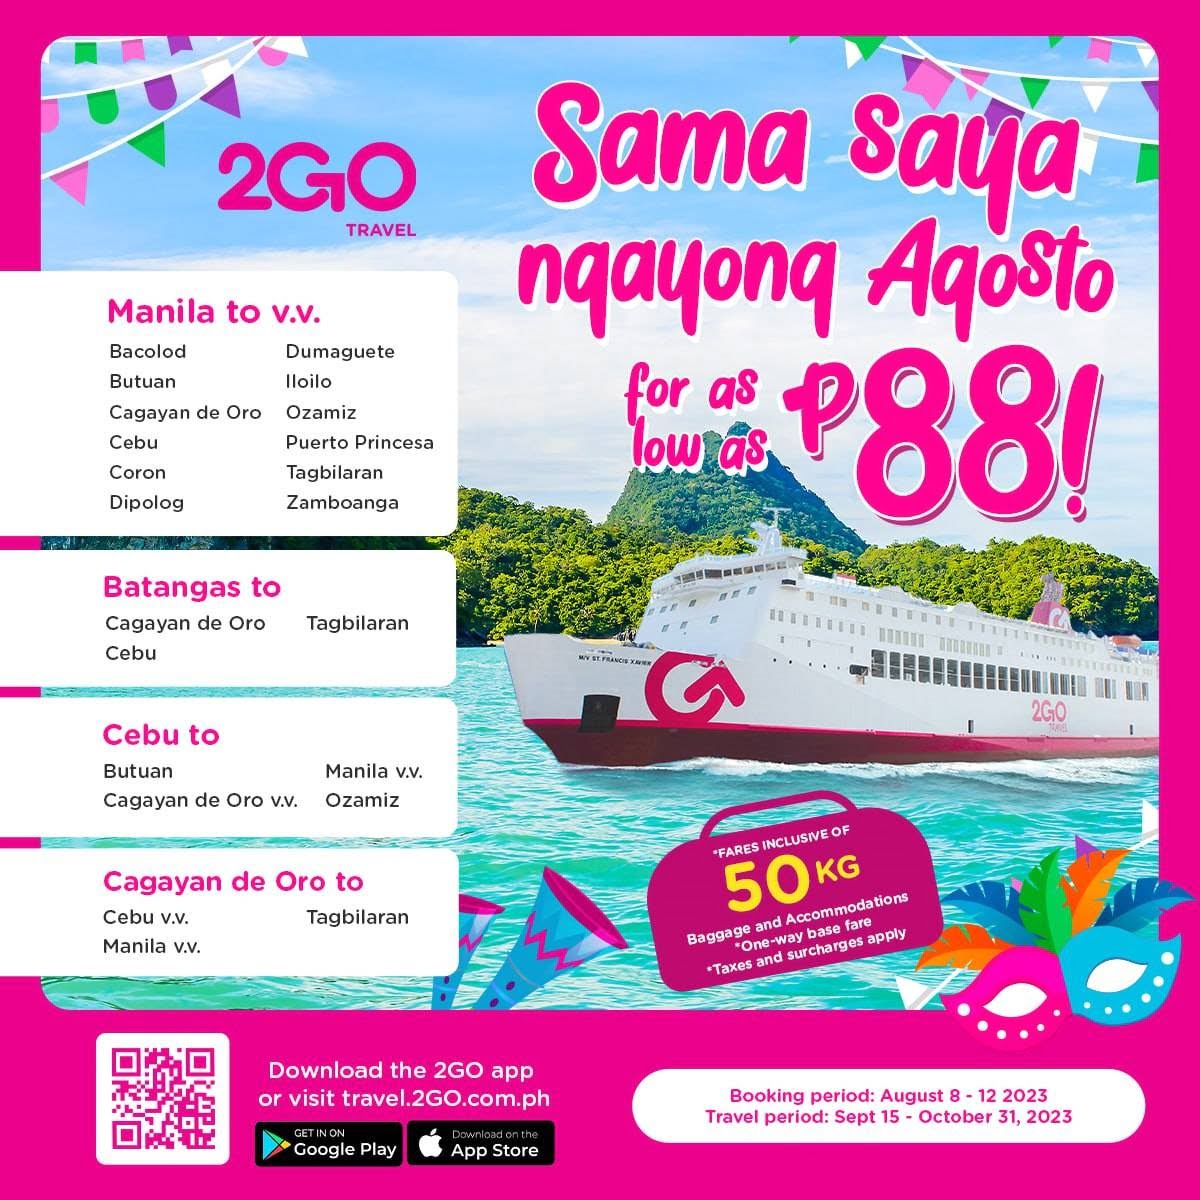 2GO continues to elevate sea travel in service of Philippine travelers